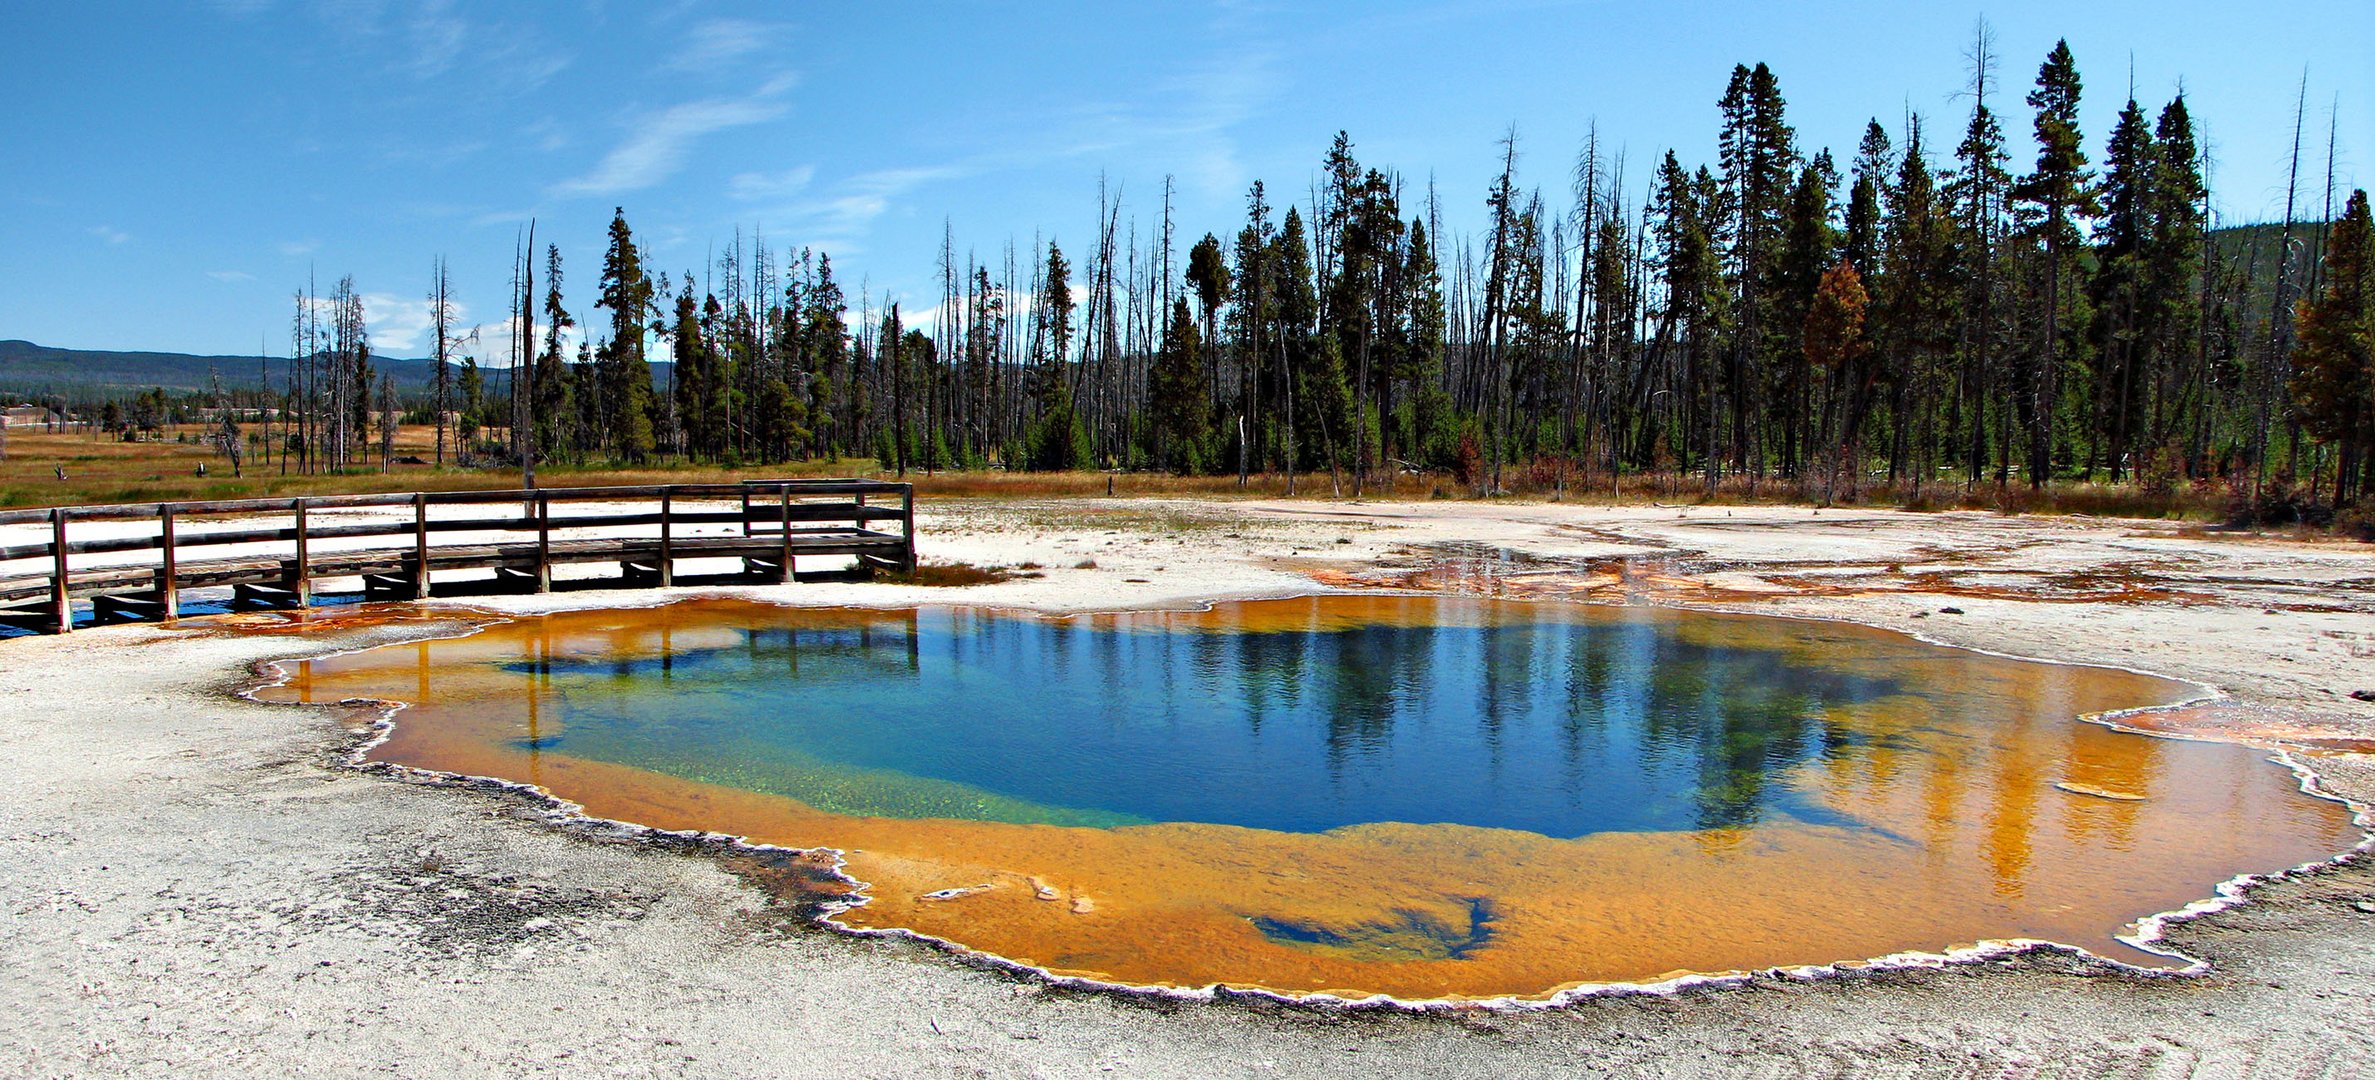 Another awesome pool in the Yellowstone N.P.